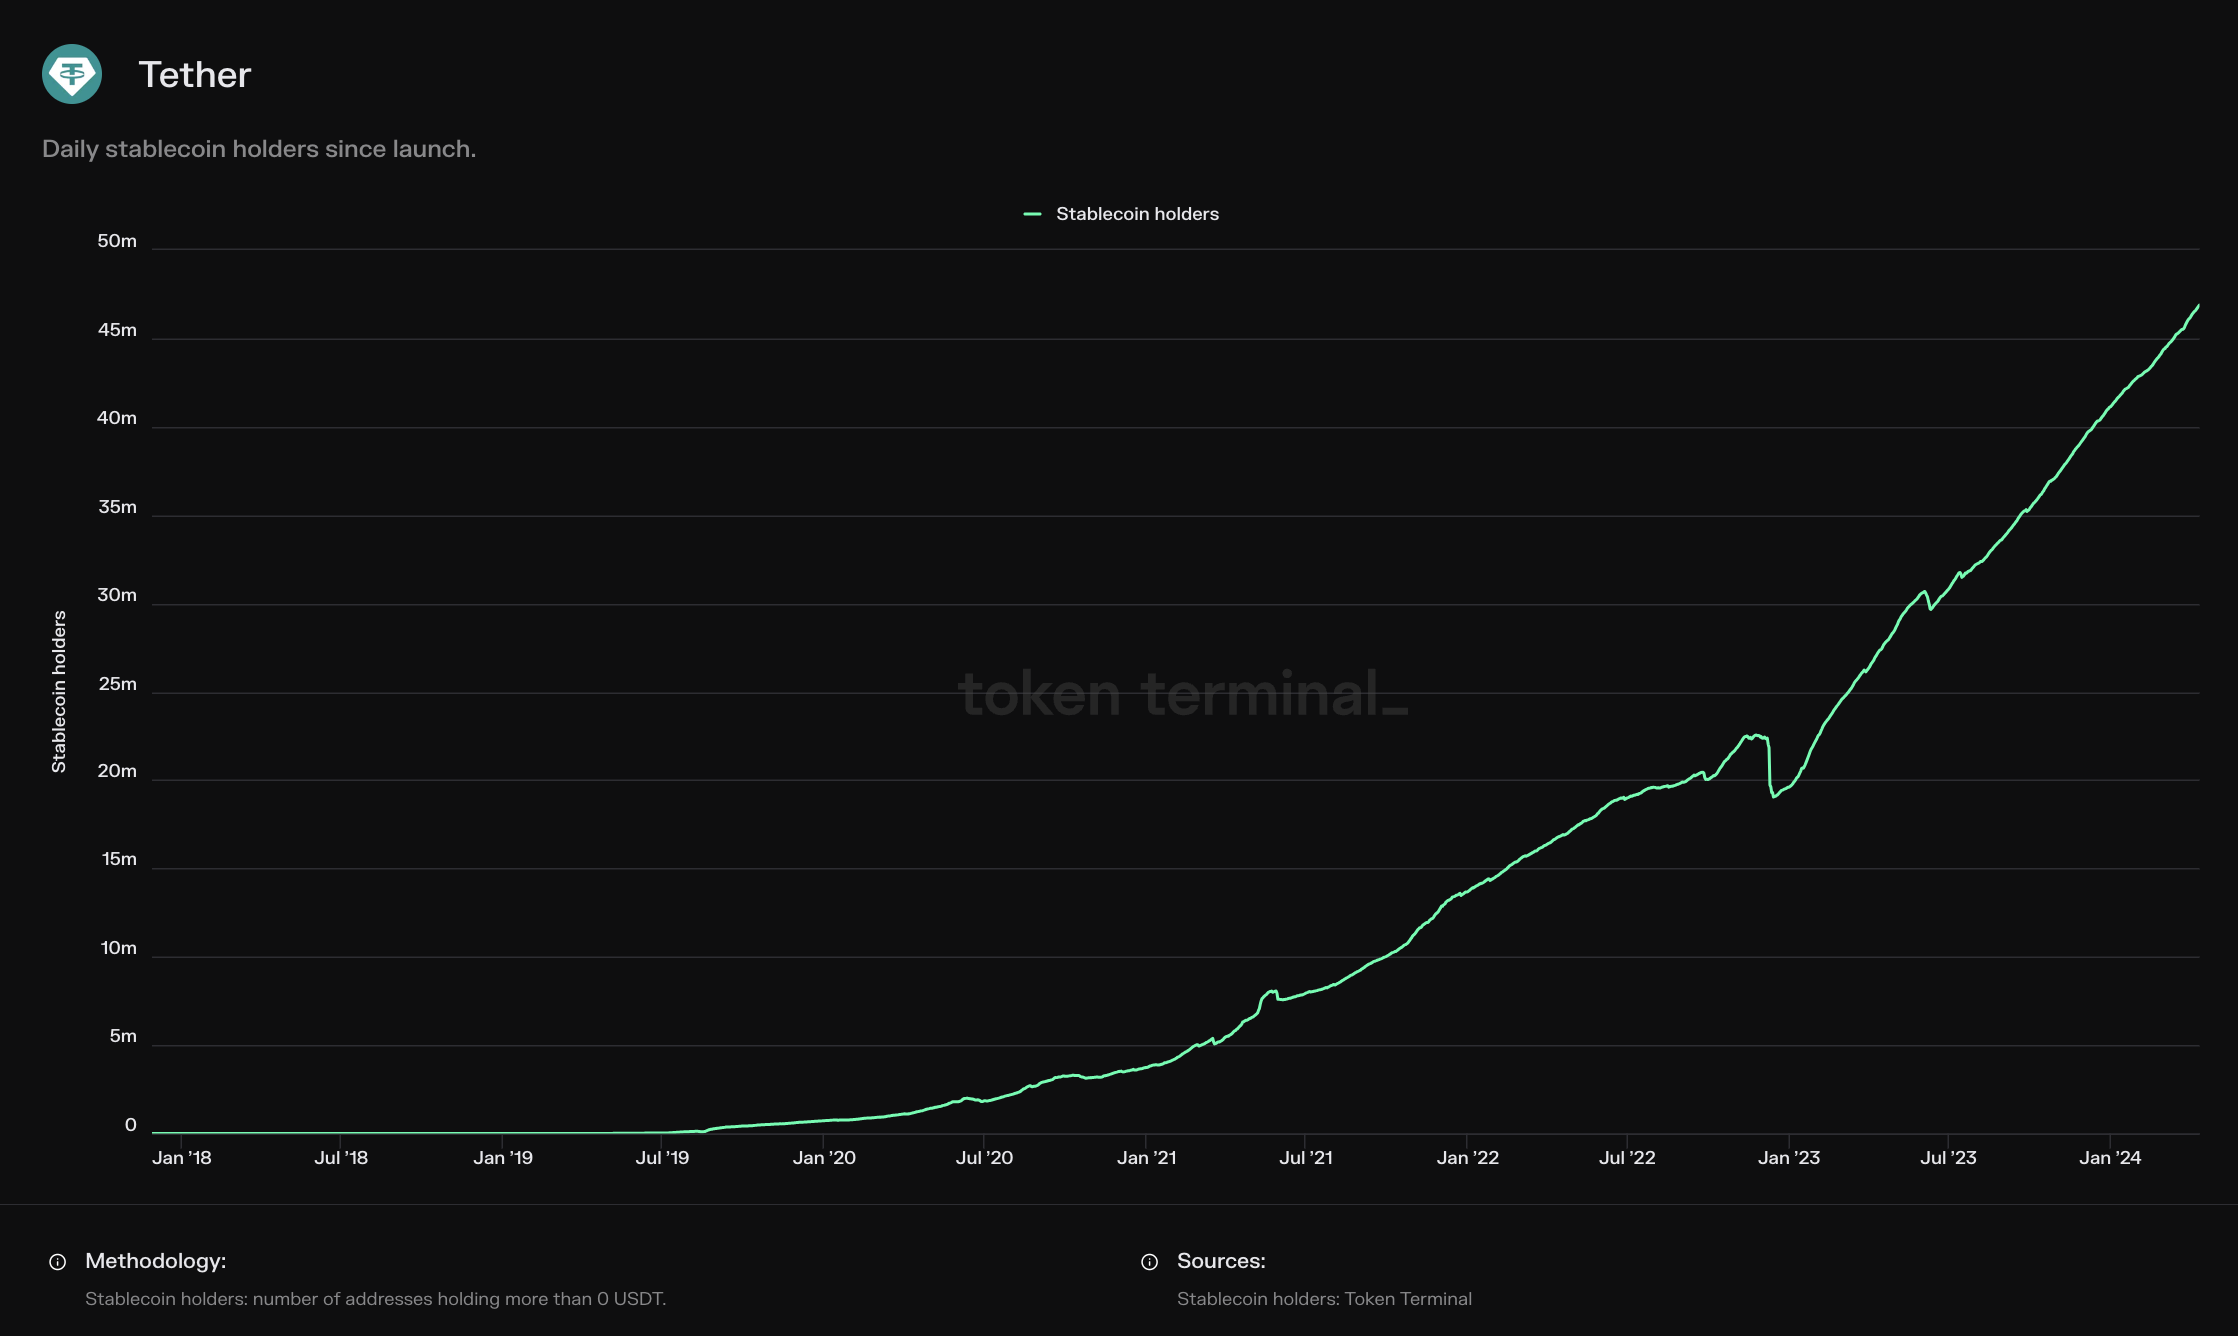 Tether dashboard: <https://tokenterminal.com/terminal/projects/tether>